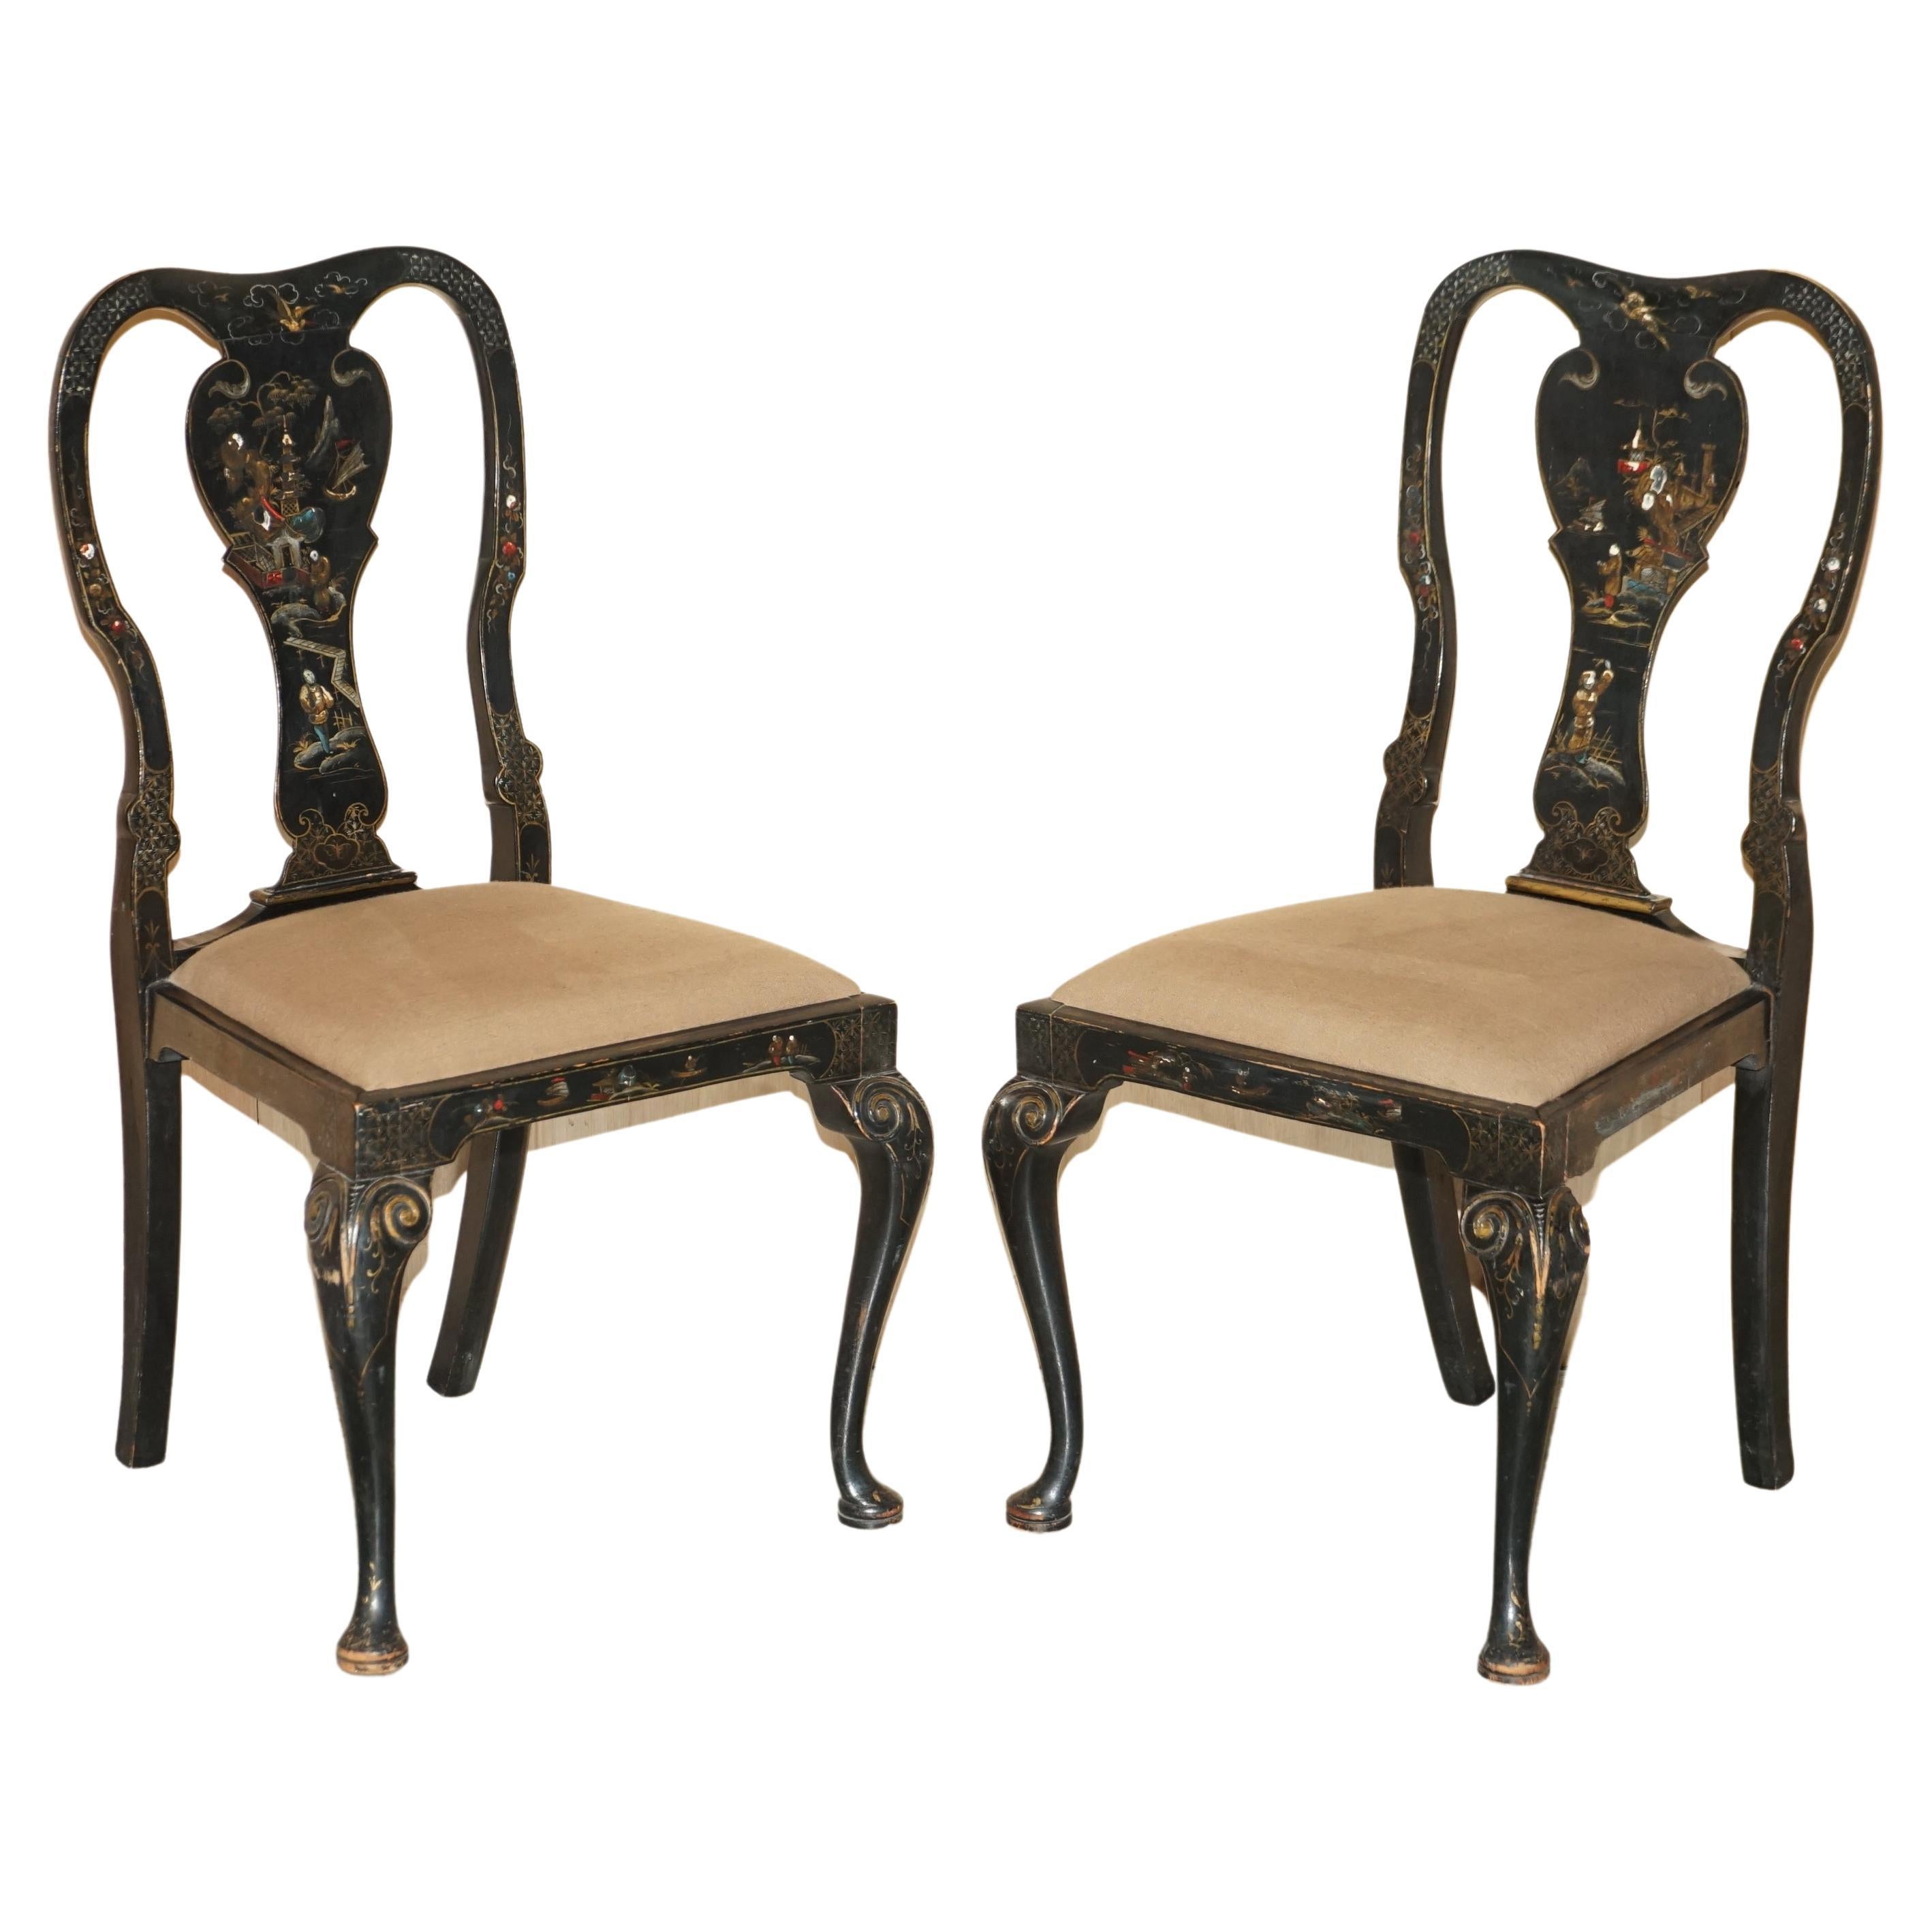 Pair of Antique Chinese Chinoiserie Black Lacquered Georgian Style Side Chairs